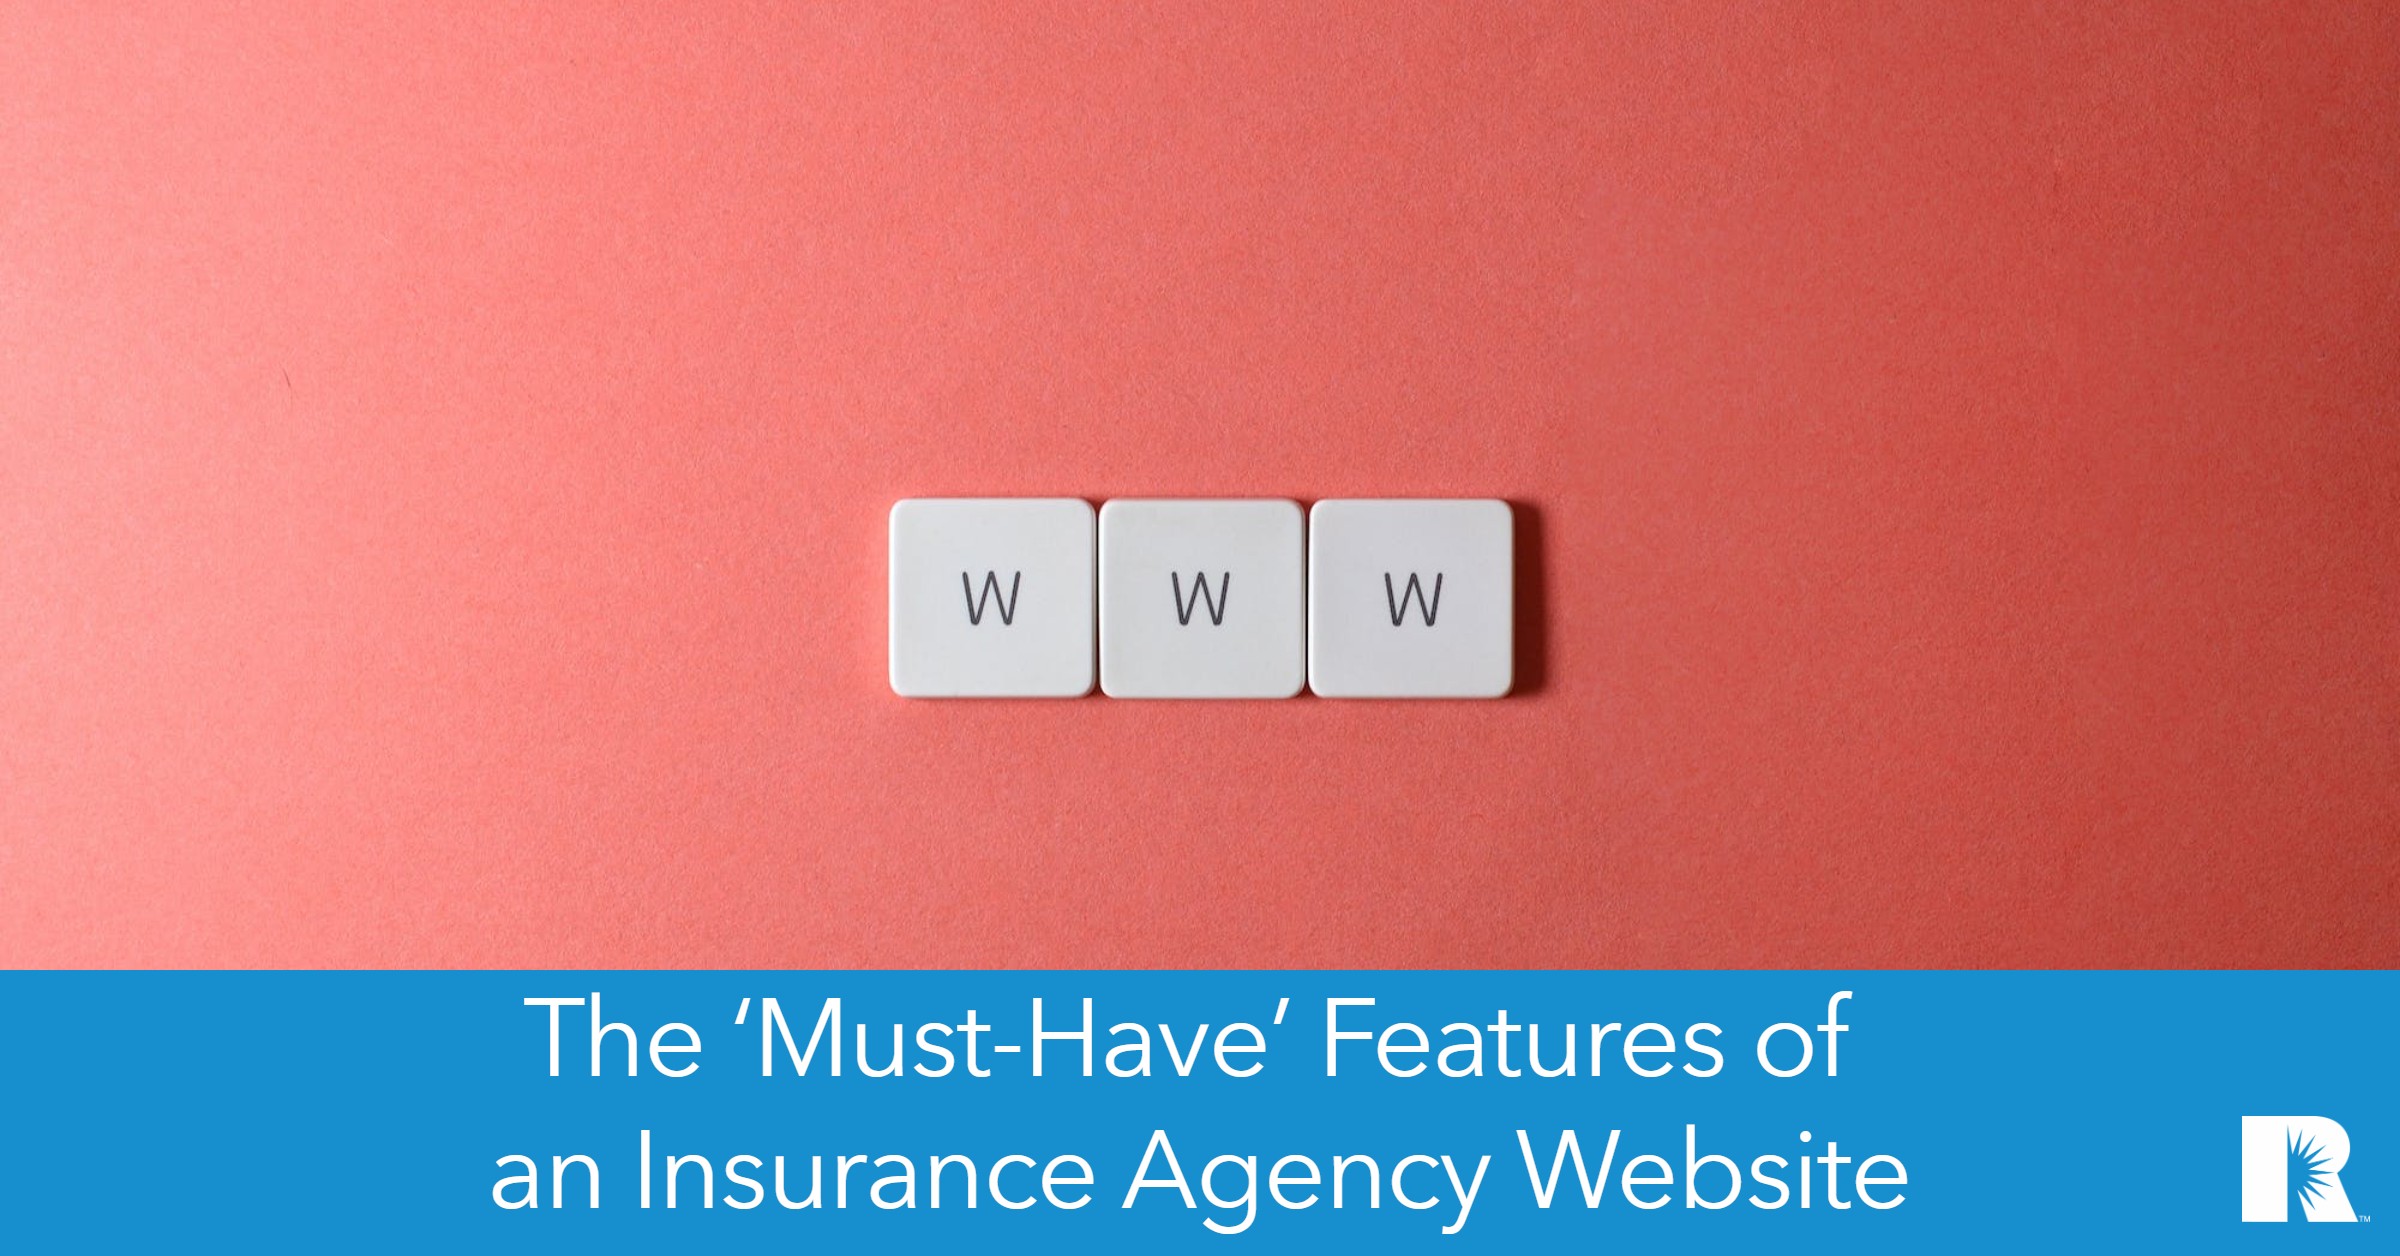 A graphic illustrating an insurance agency website.